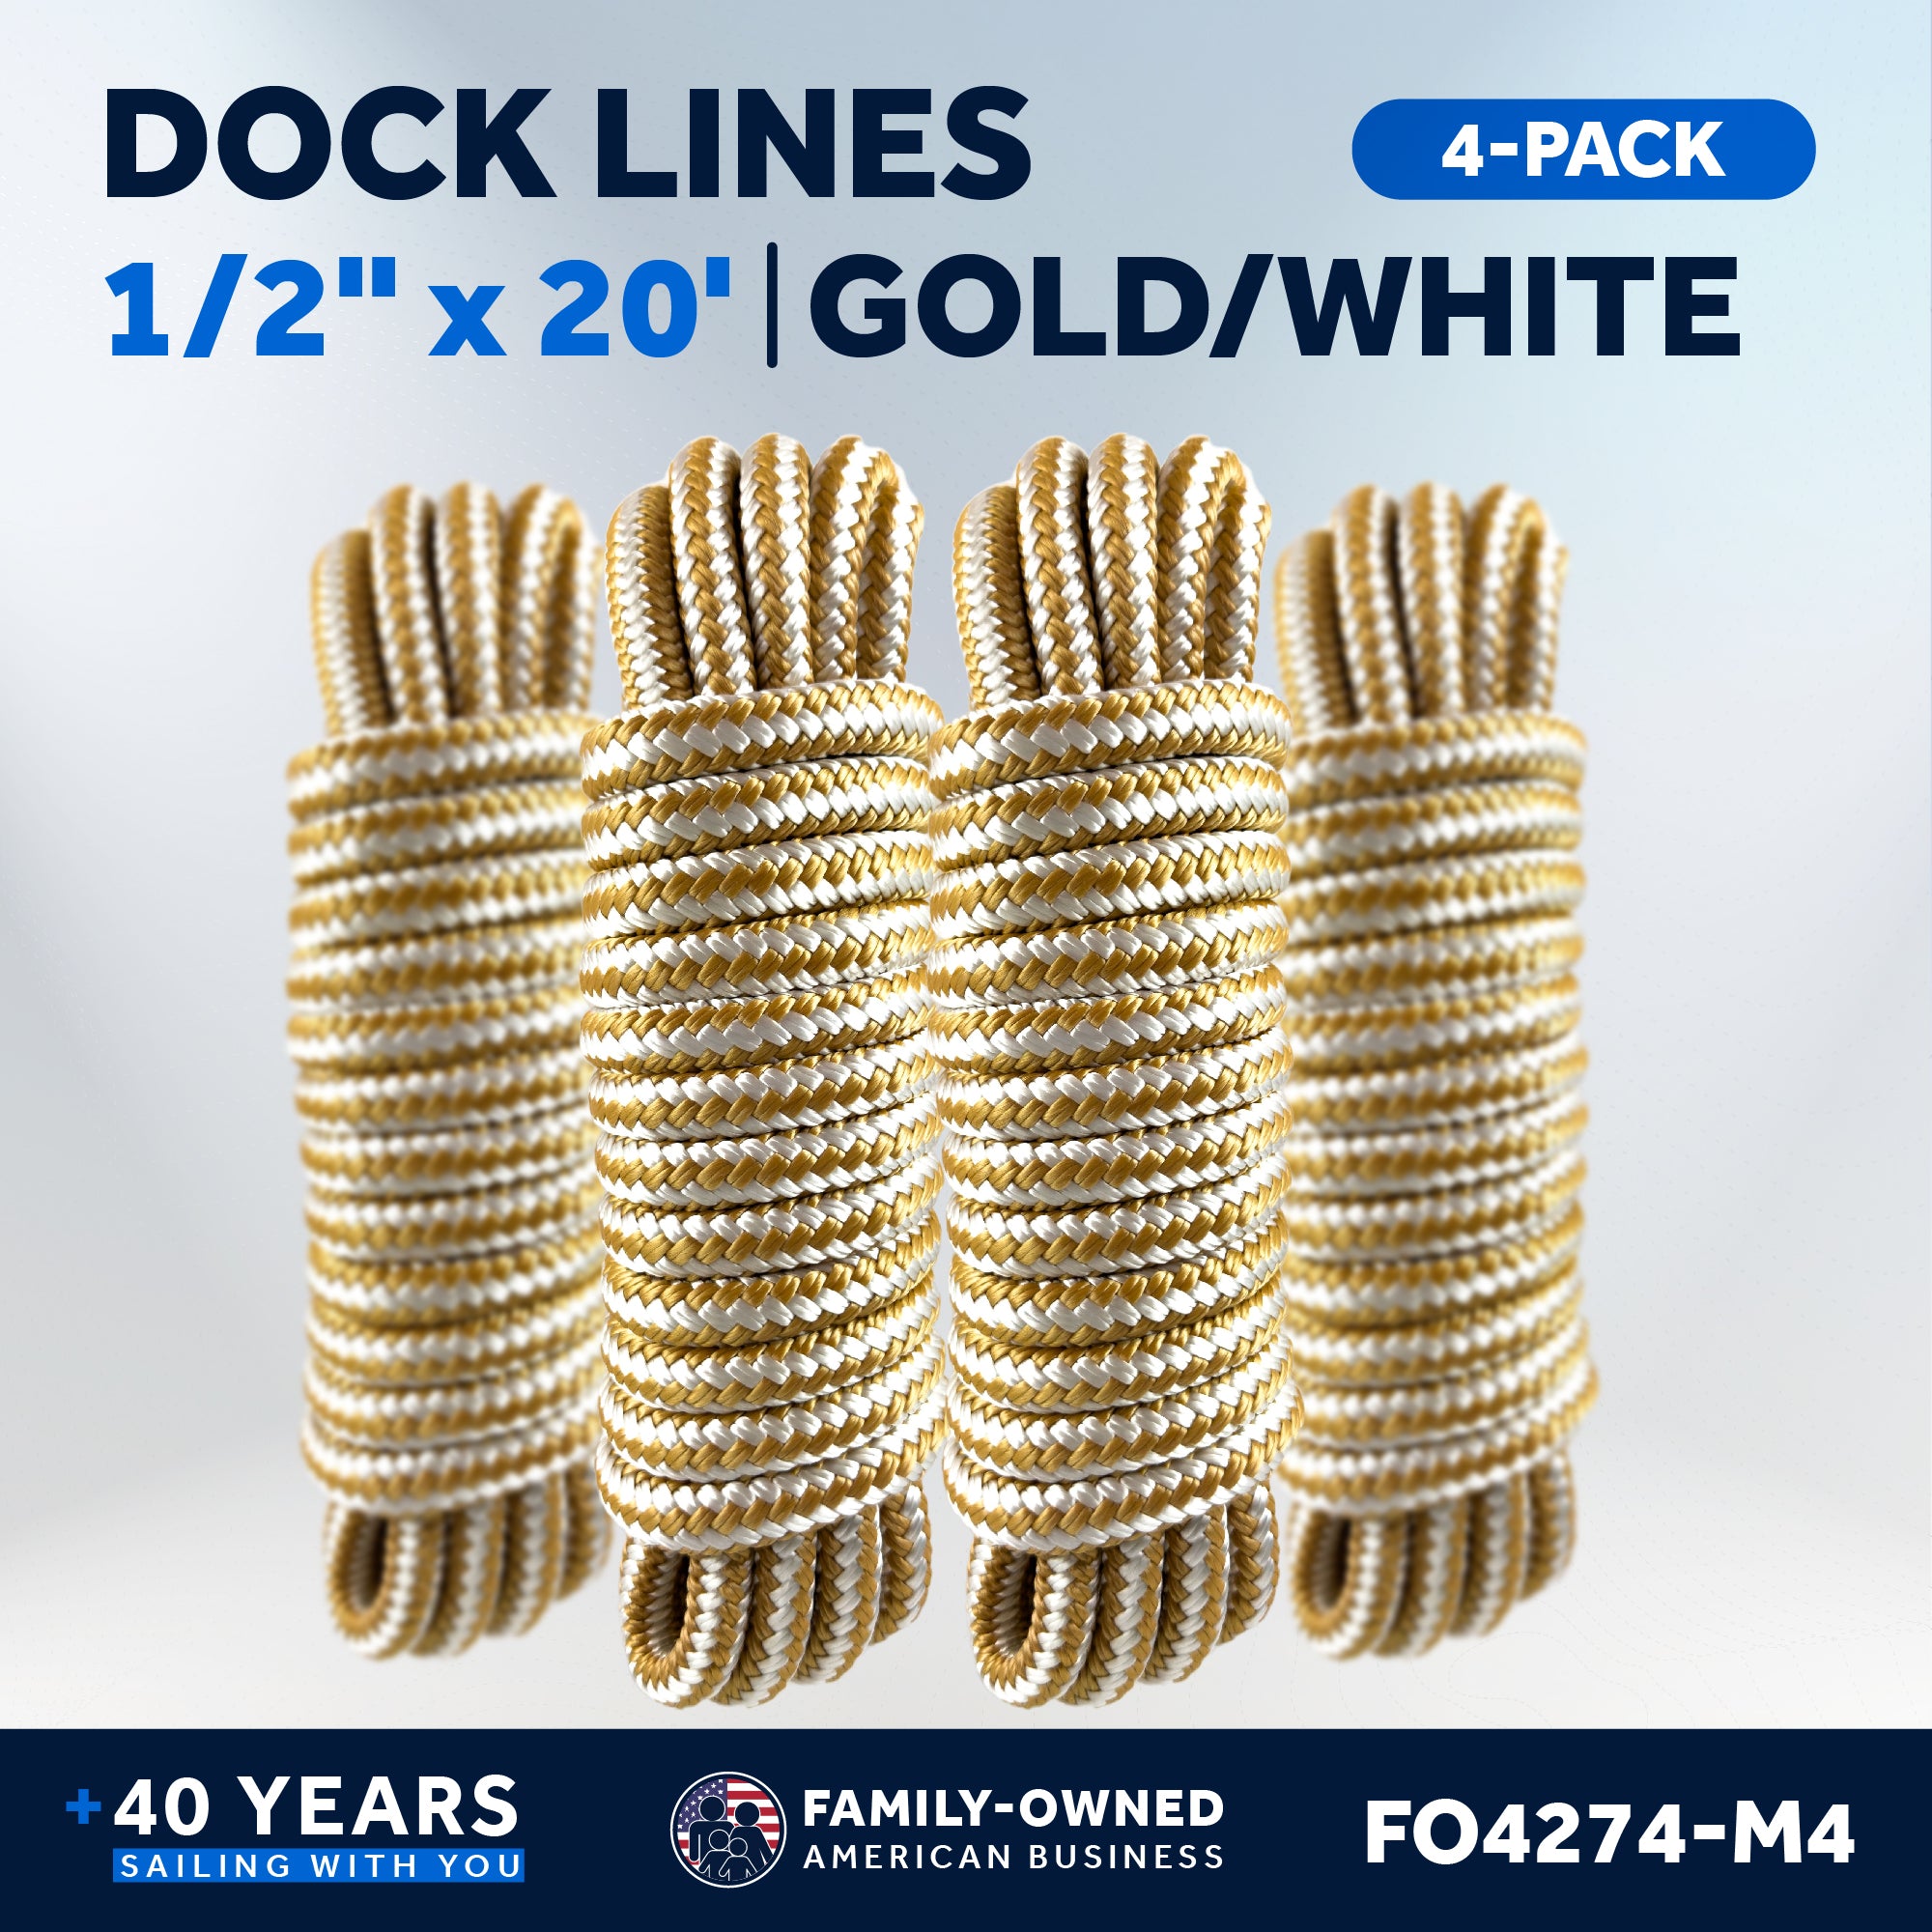 Dock Lines, 1/2" x 20', Gold/White Nylon Double Braided with 12" Eyelet, 4-Pack - FO4274-M4